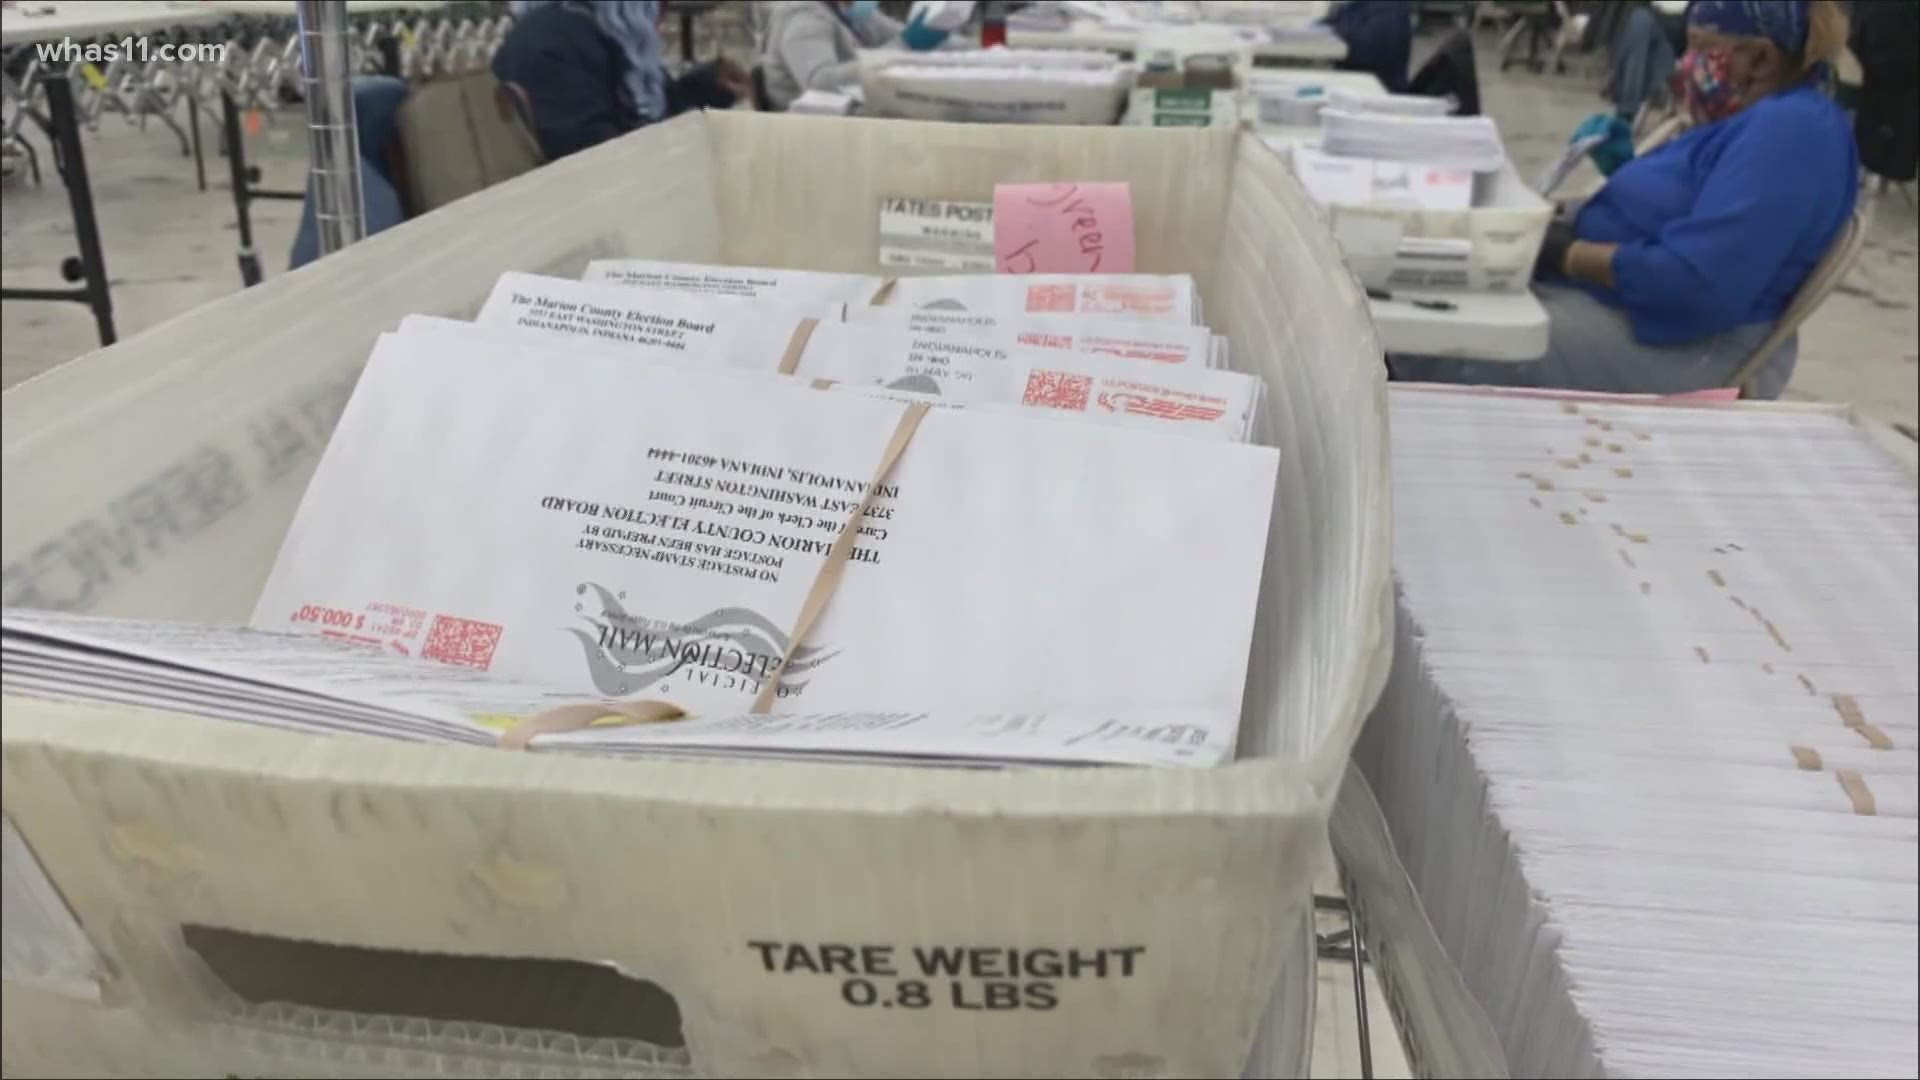 The election committee has said no to expanding mail in voting like as seen in the recent primary. Demand for absentee ballots among Hoosiers is still high.